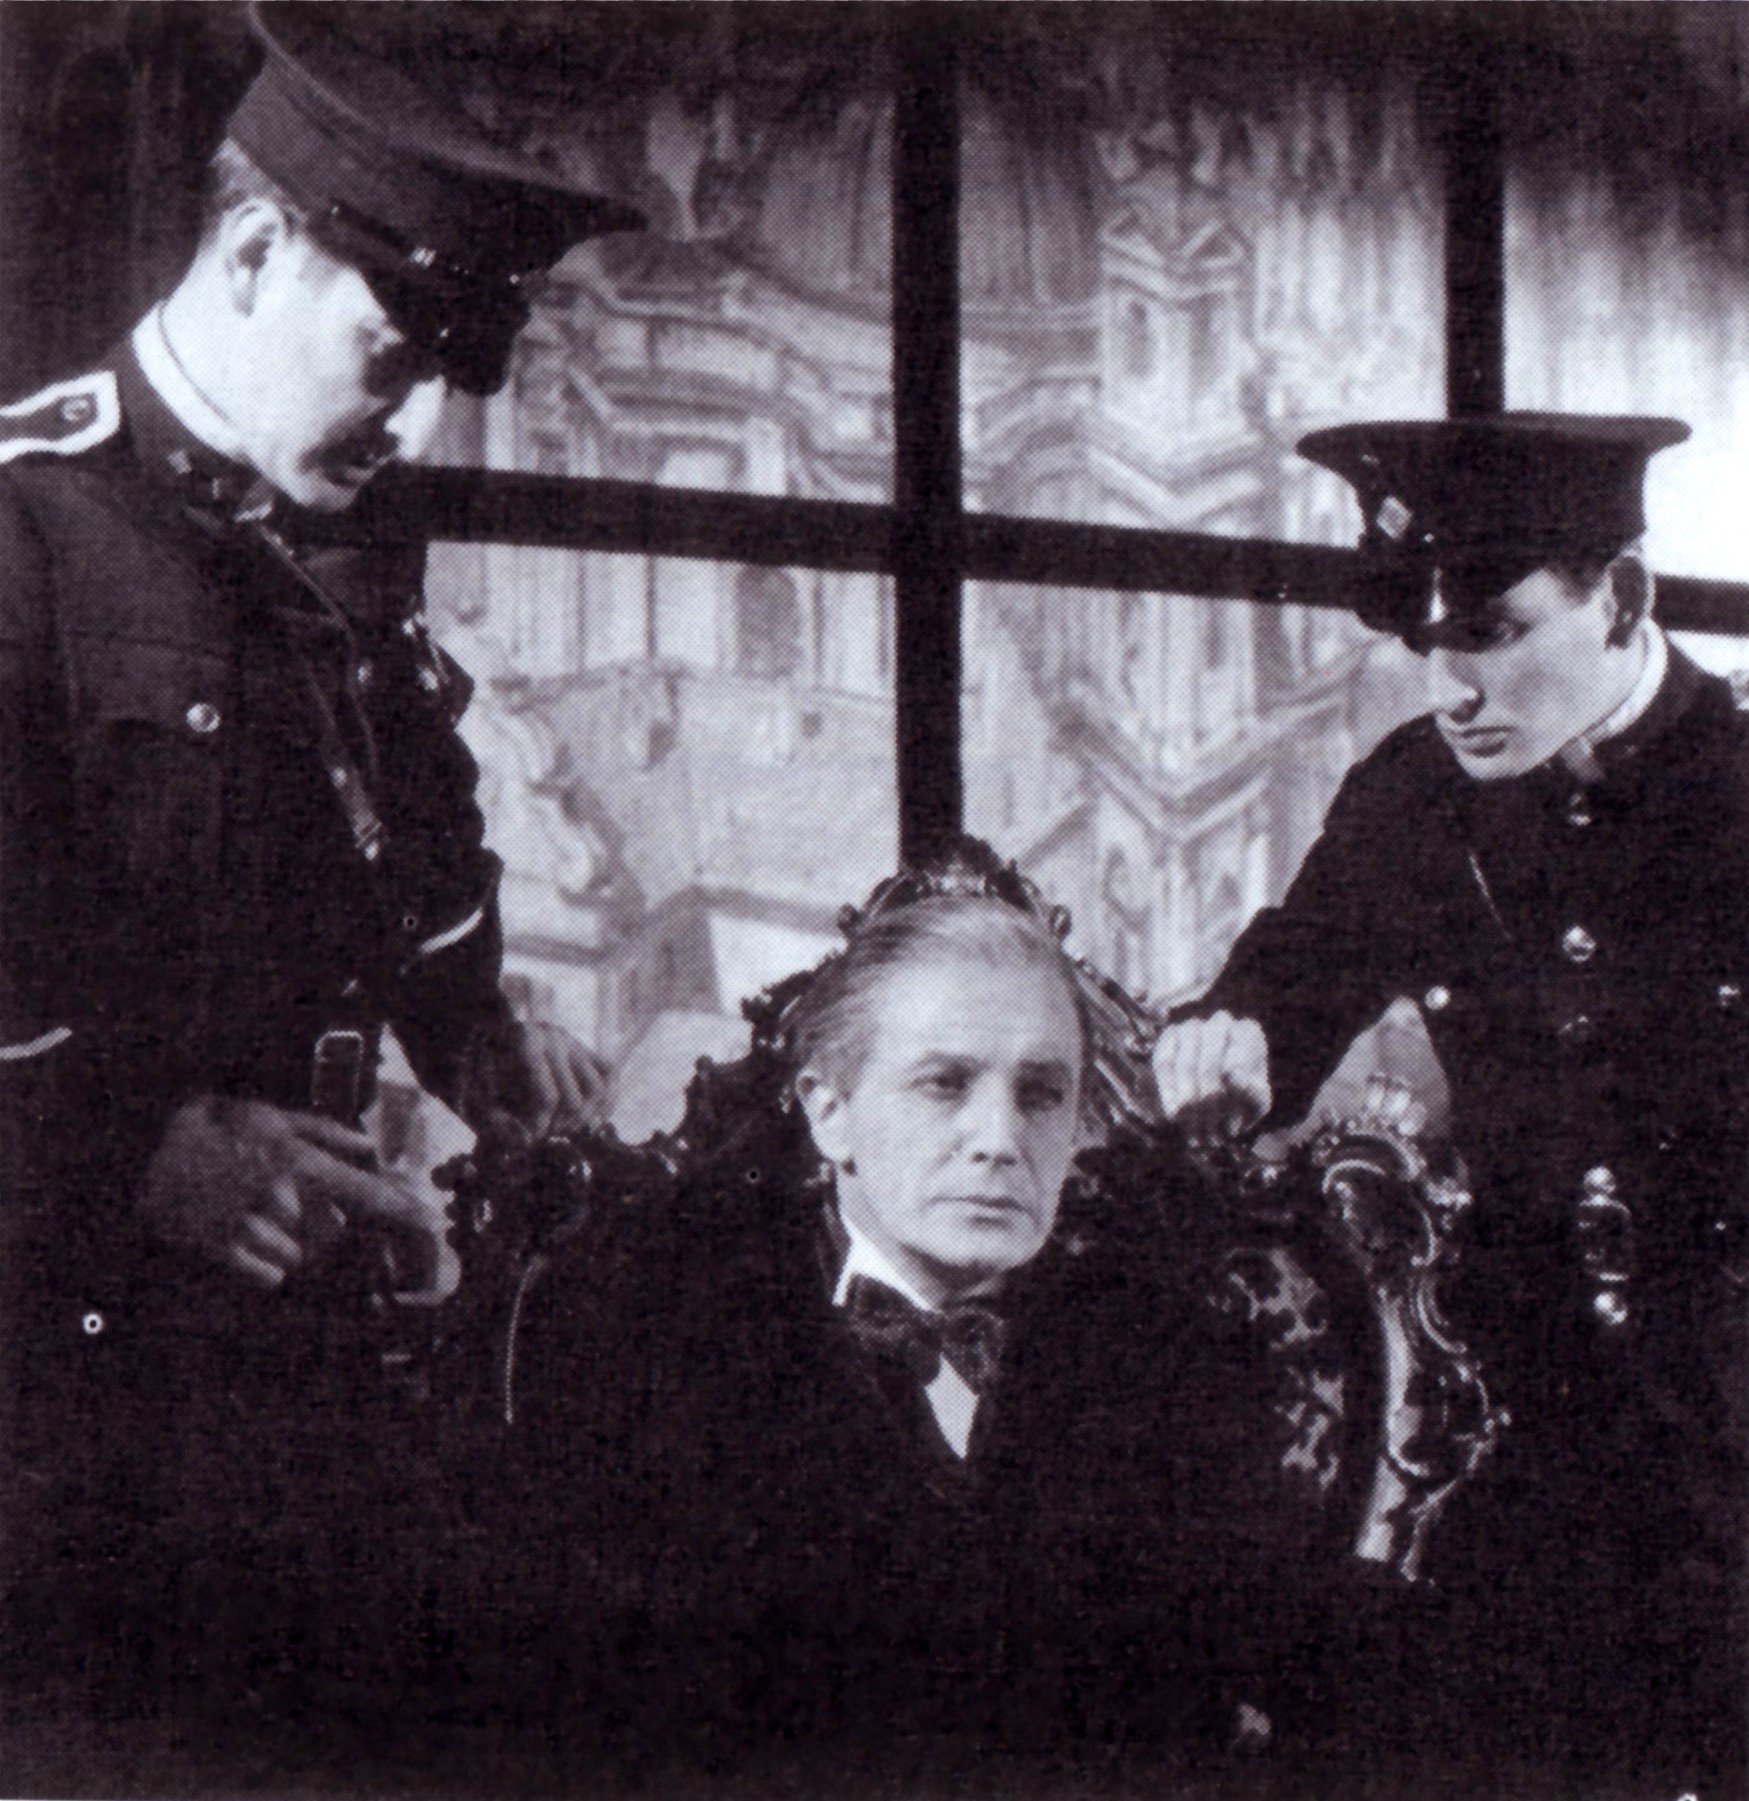 Ivor Novello as Rudi Kleber, being arrested by the Nazis. Scene from the original London production.